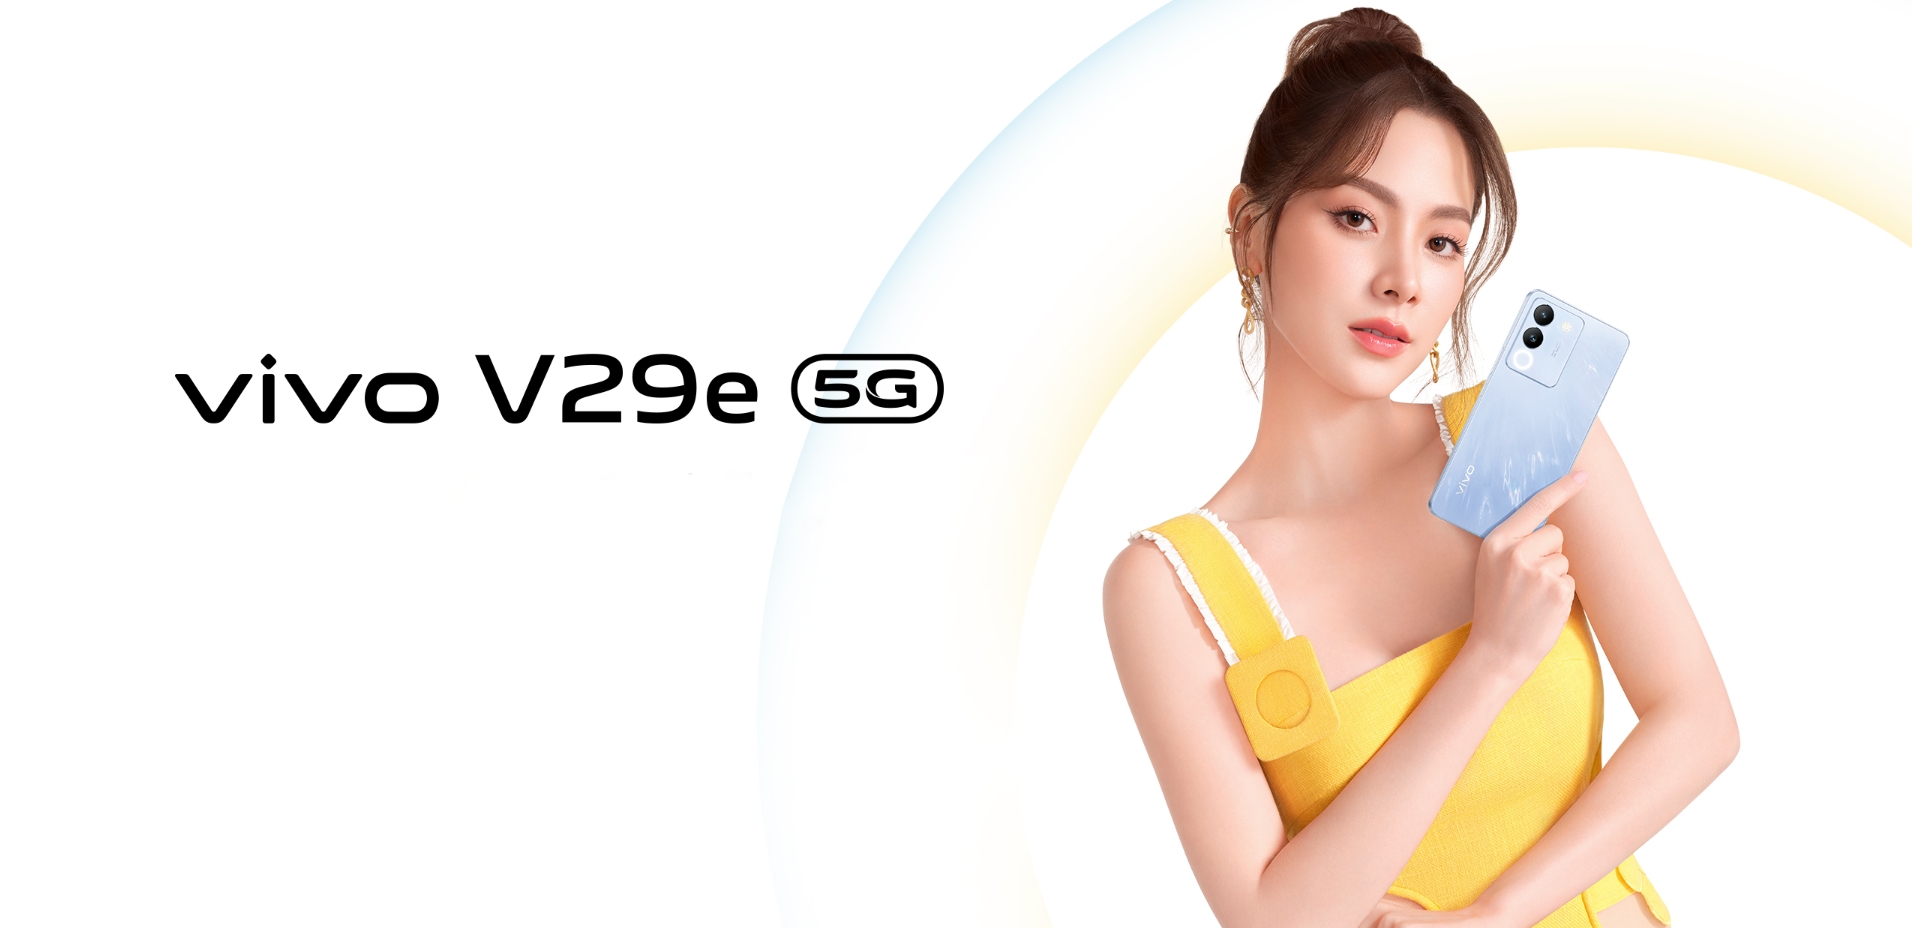 The vivo V29e has made its global debut with a 120Hz AMOLED display, Snapdragon 695 chip, 44W charging and a 64MP camera